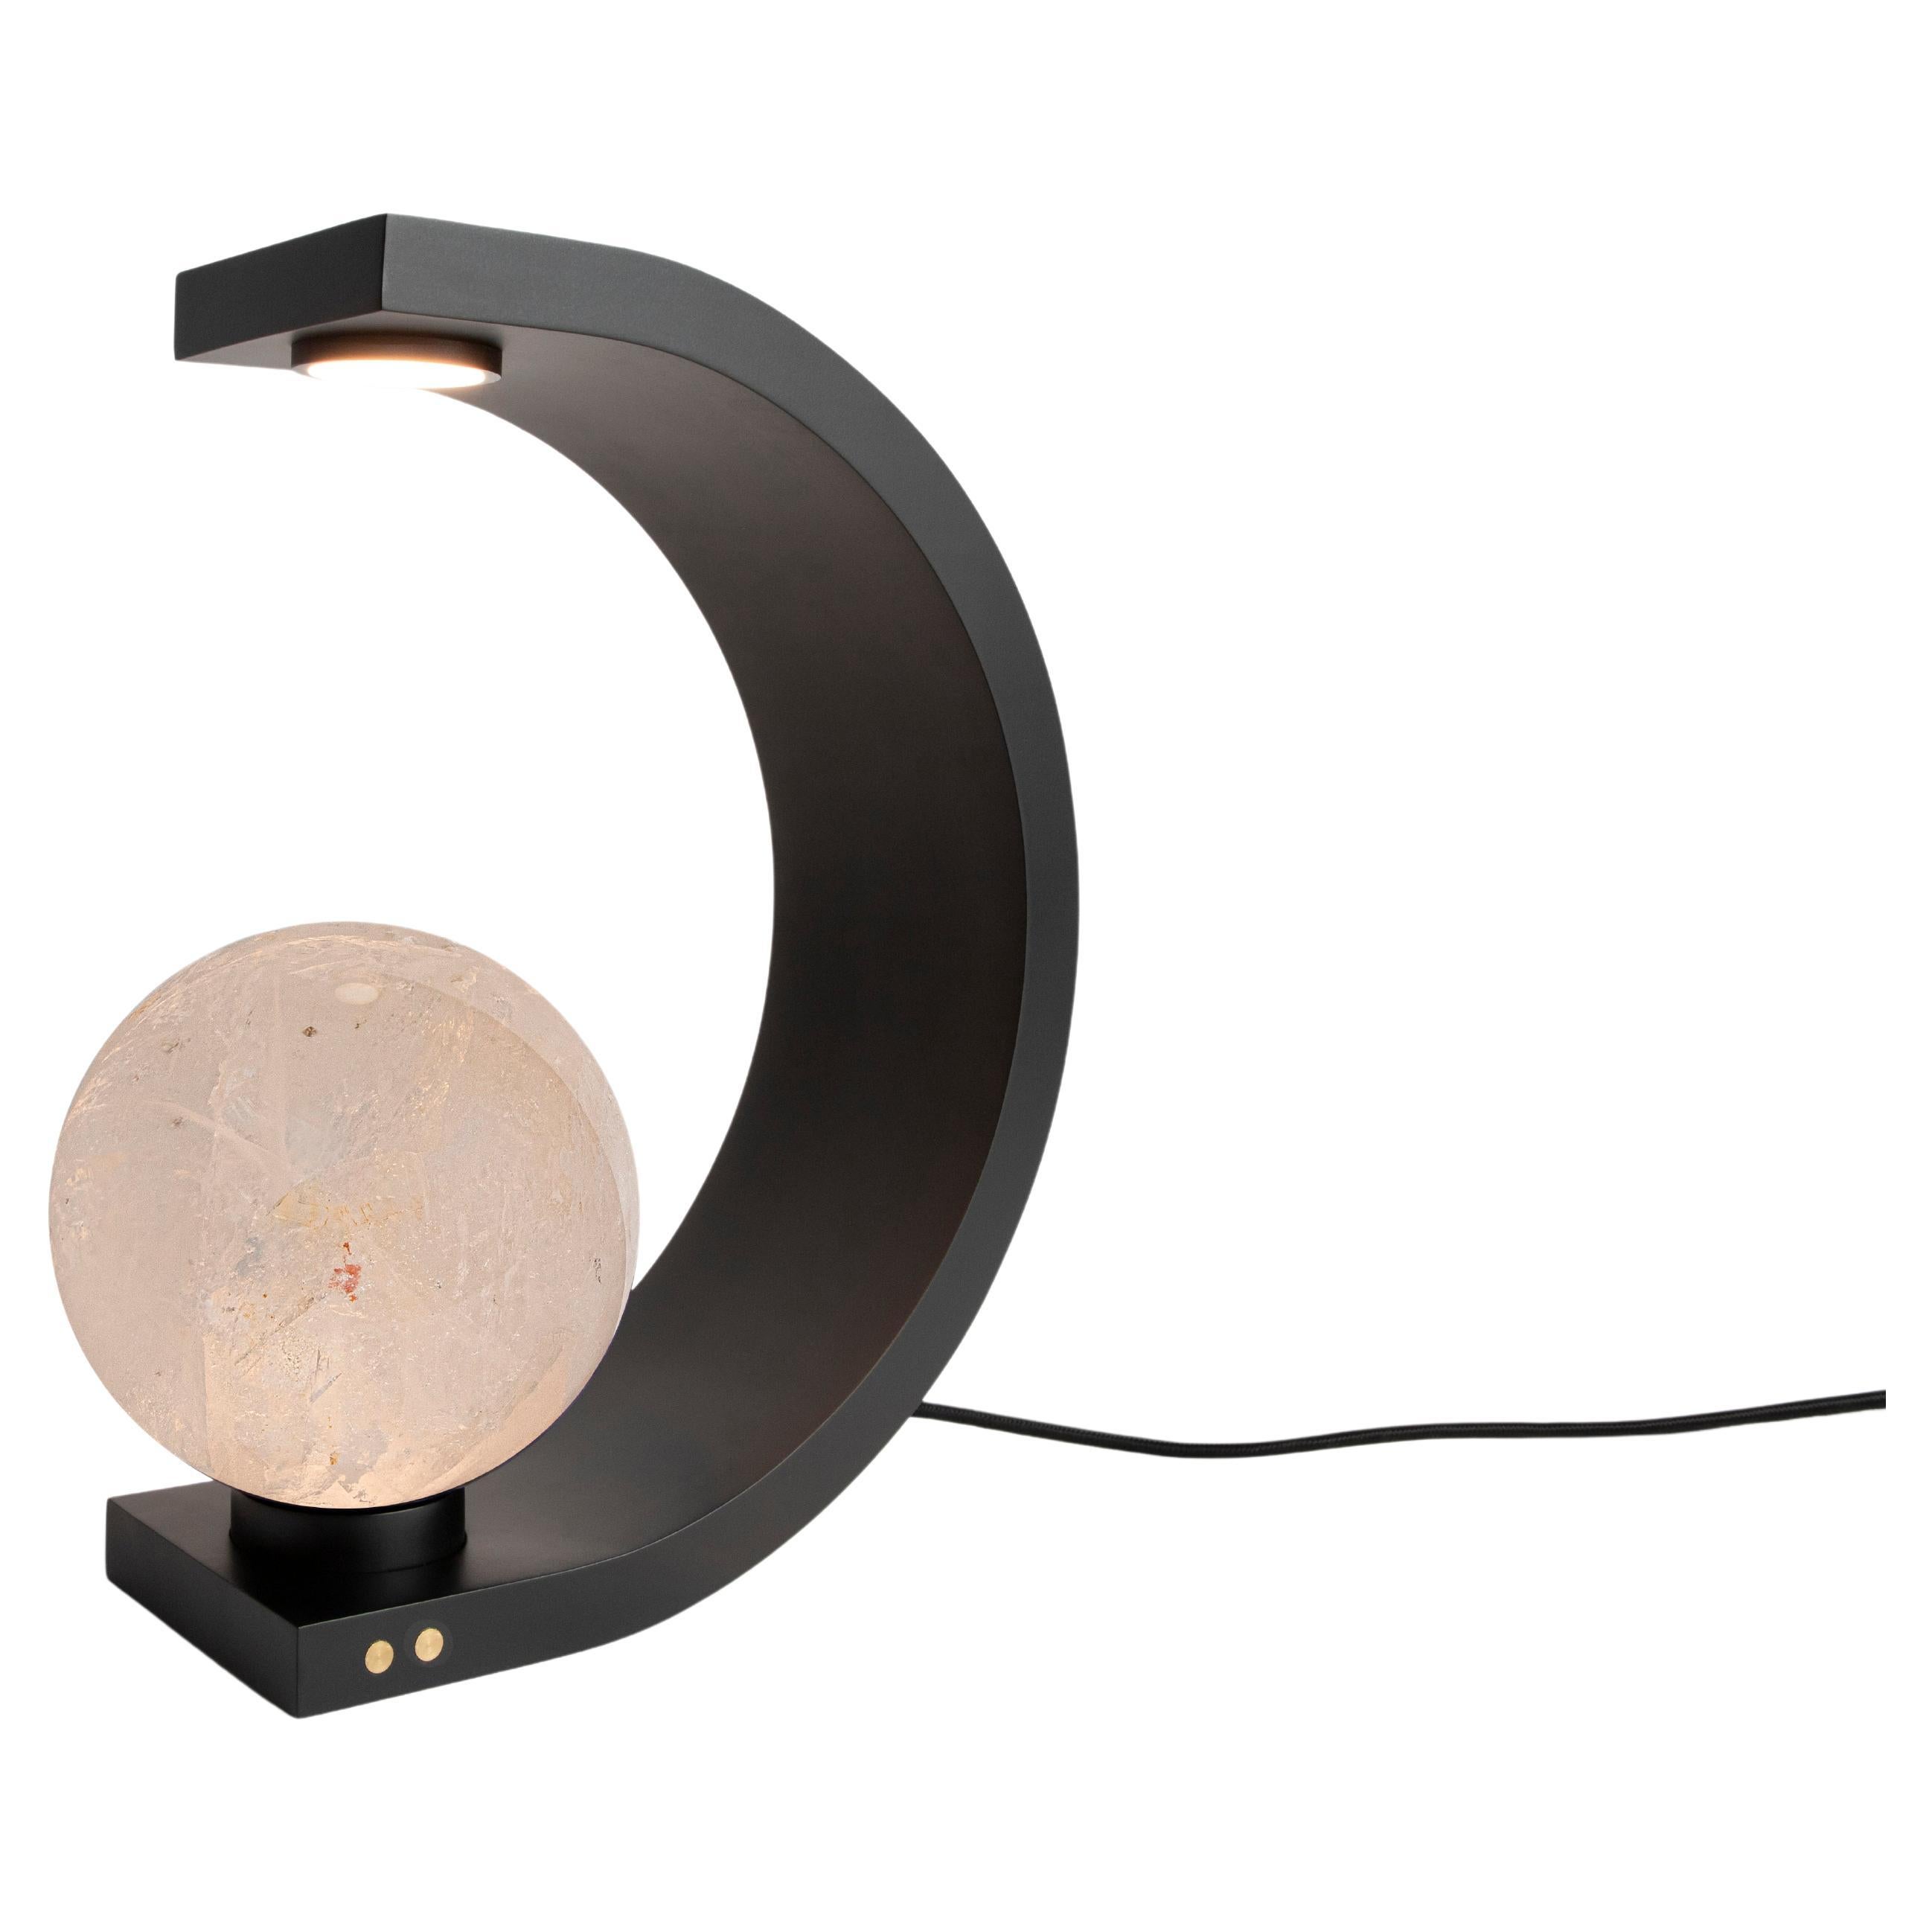 Hotai II Table Lamp by Sten Studio, Represented by Tuleste Factory For Sale